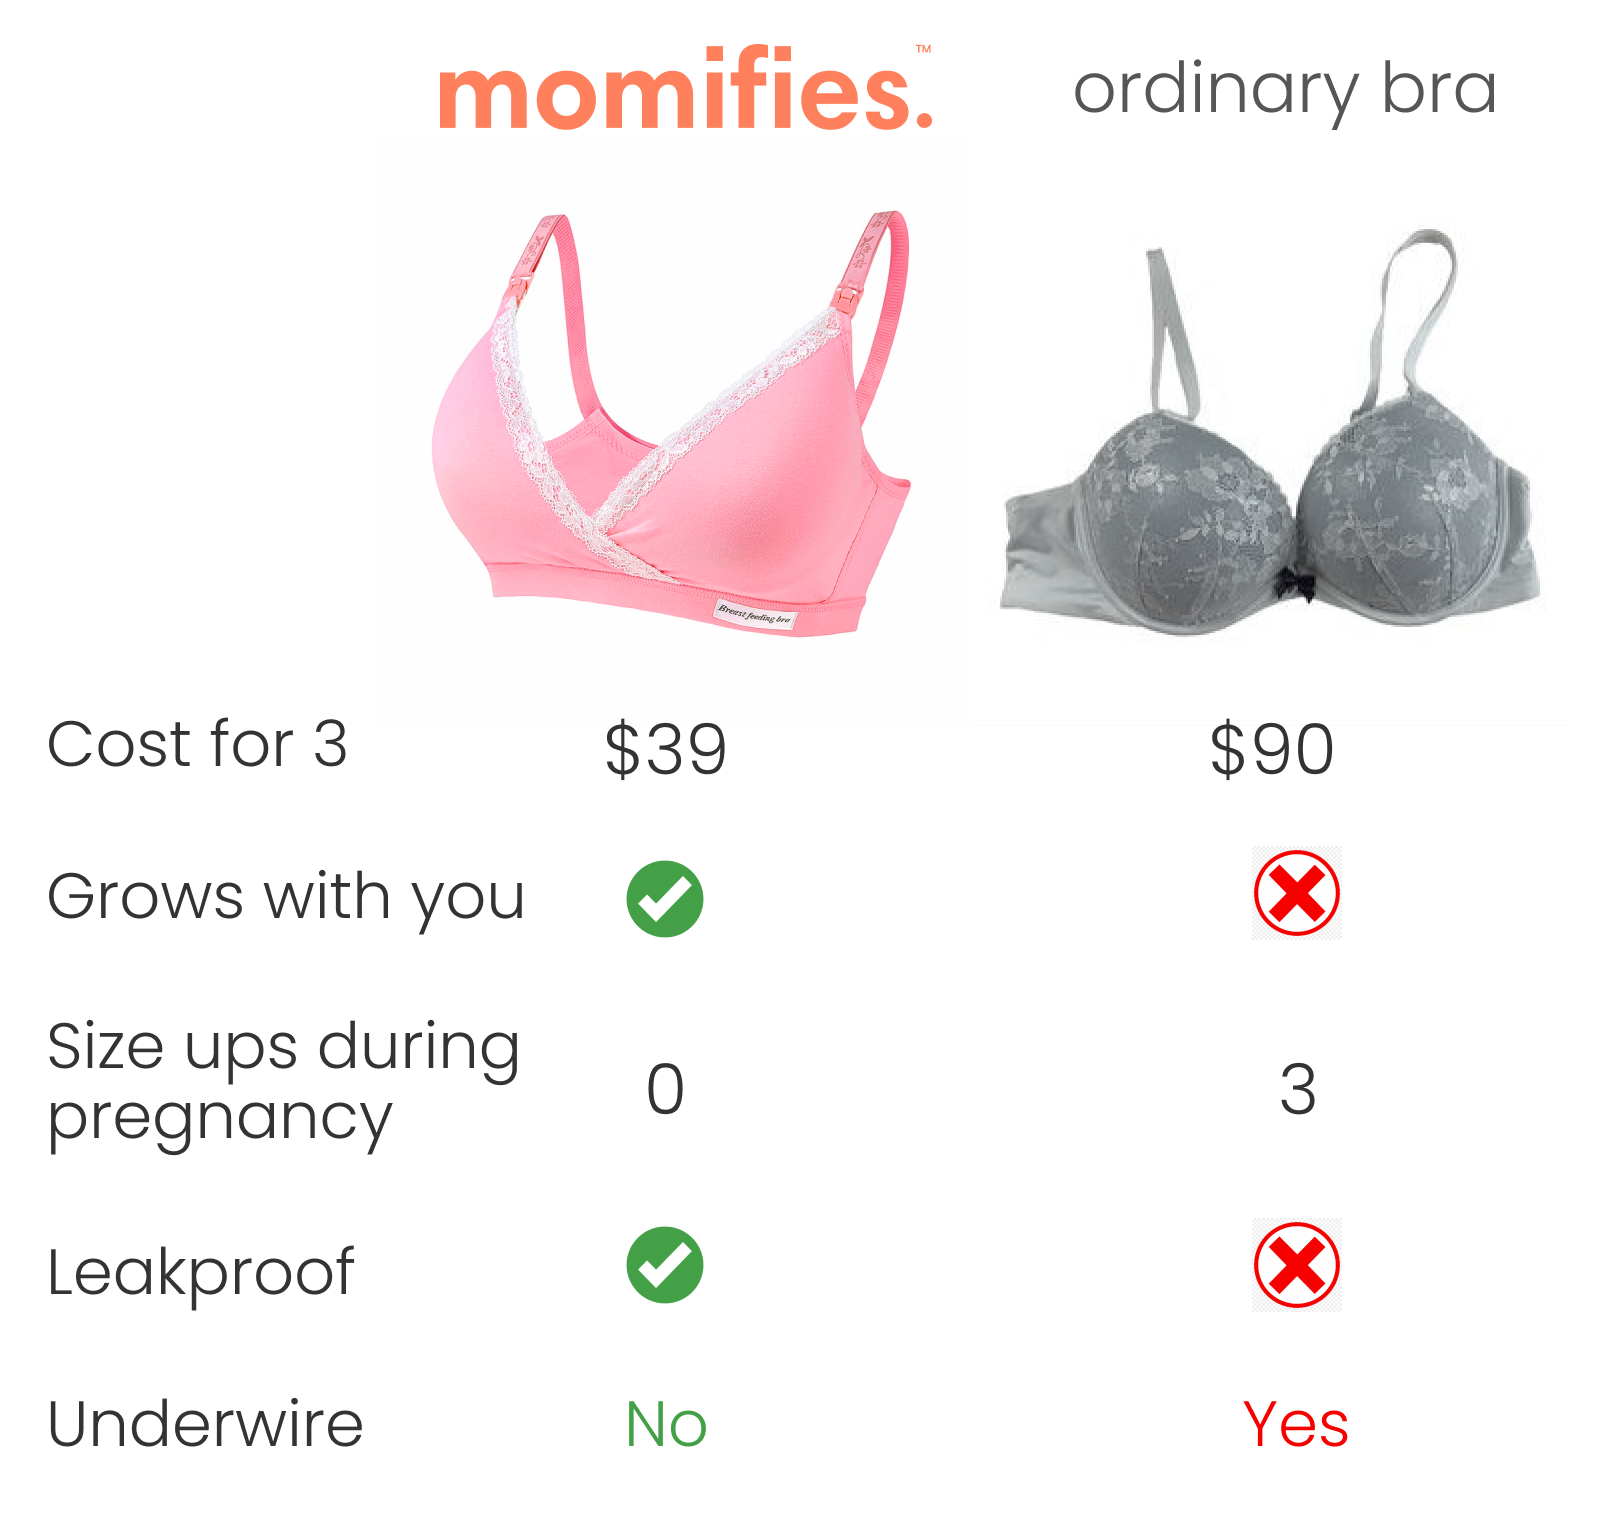 Maternity Bra Sale - Get 3 for $39 and Save $48 on our Nursing Bras